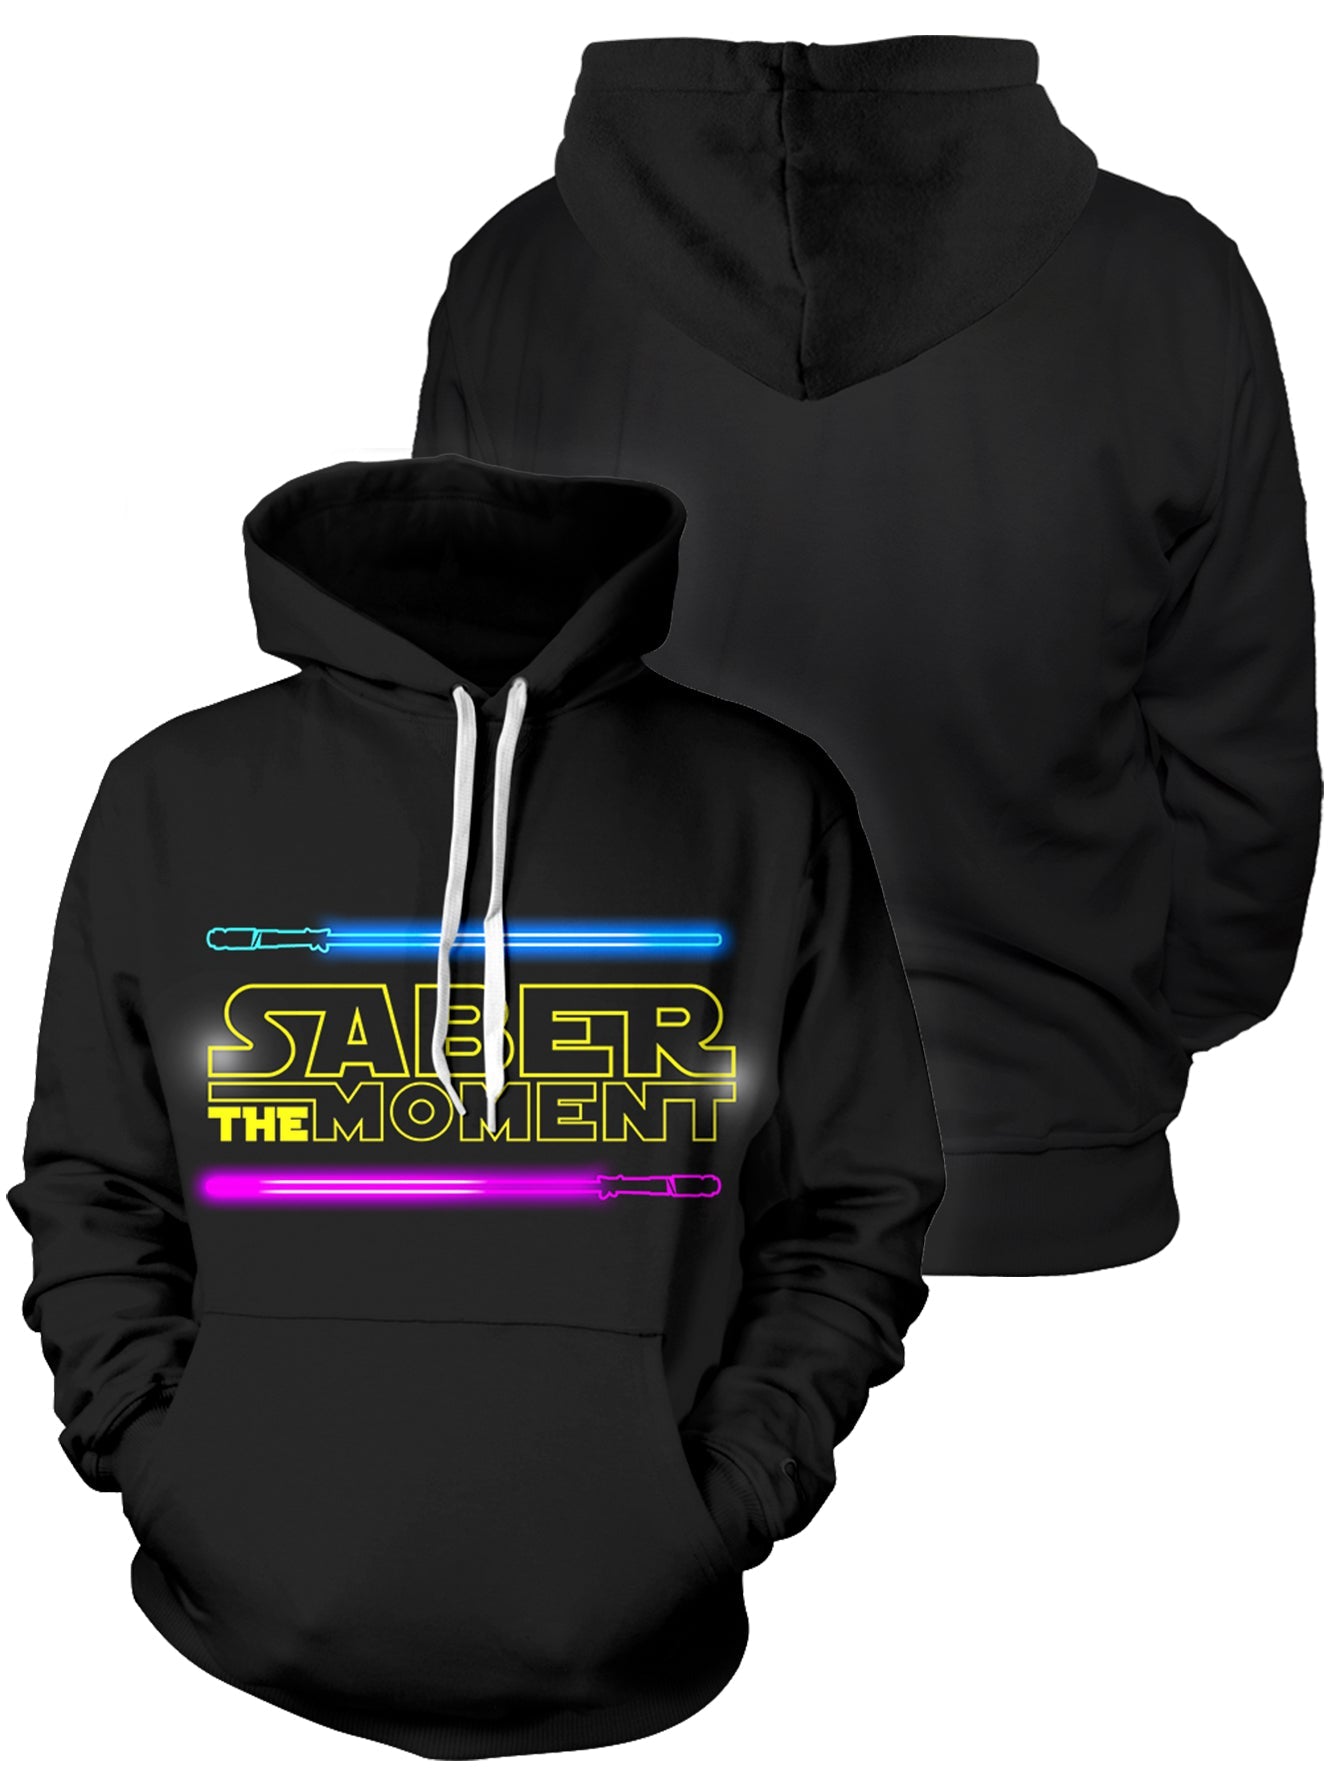 Fandomaniax - Starwars I Saber The Moment Unisex Pullover Hoodie